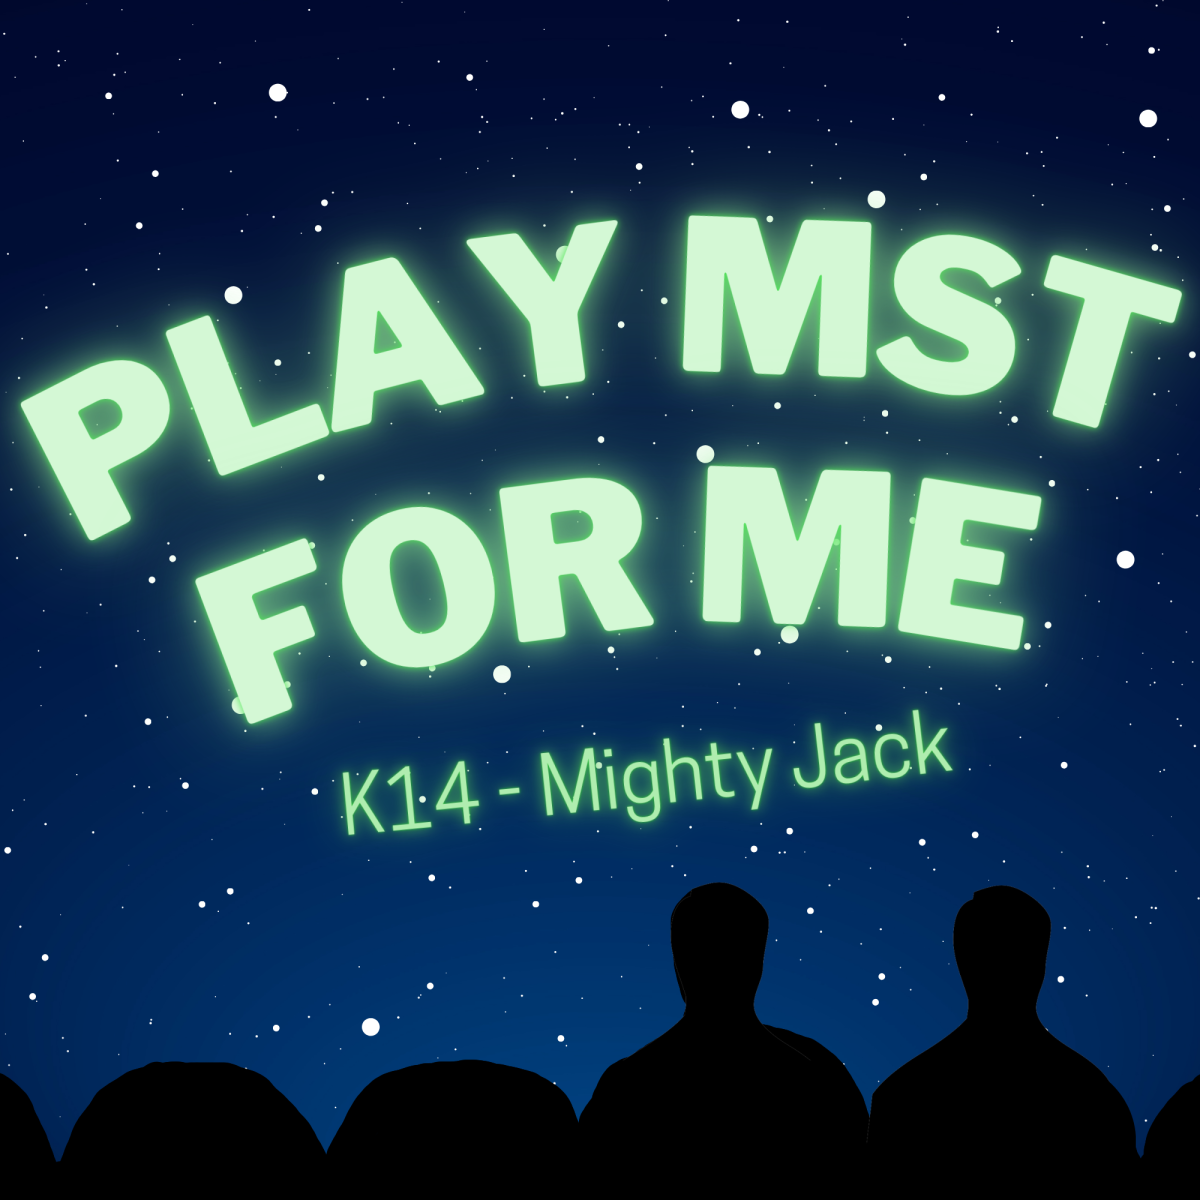 Play MST for Me #14: K14-Mighty Jack